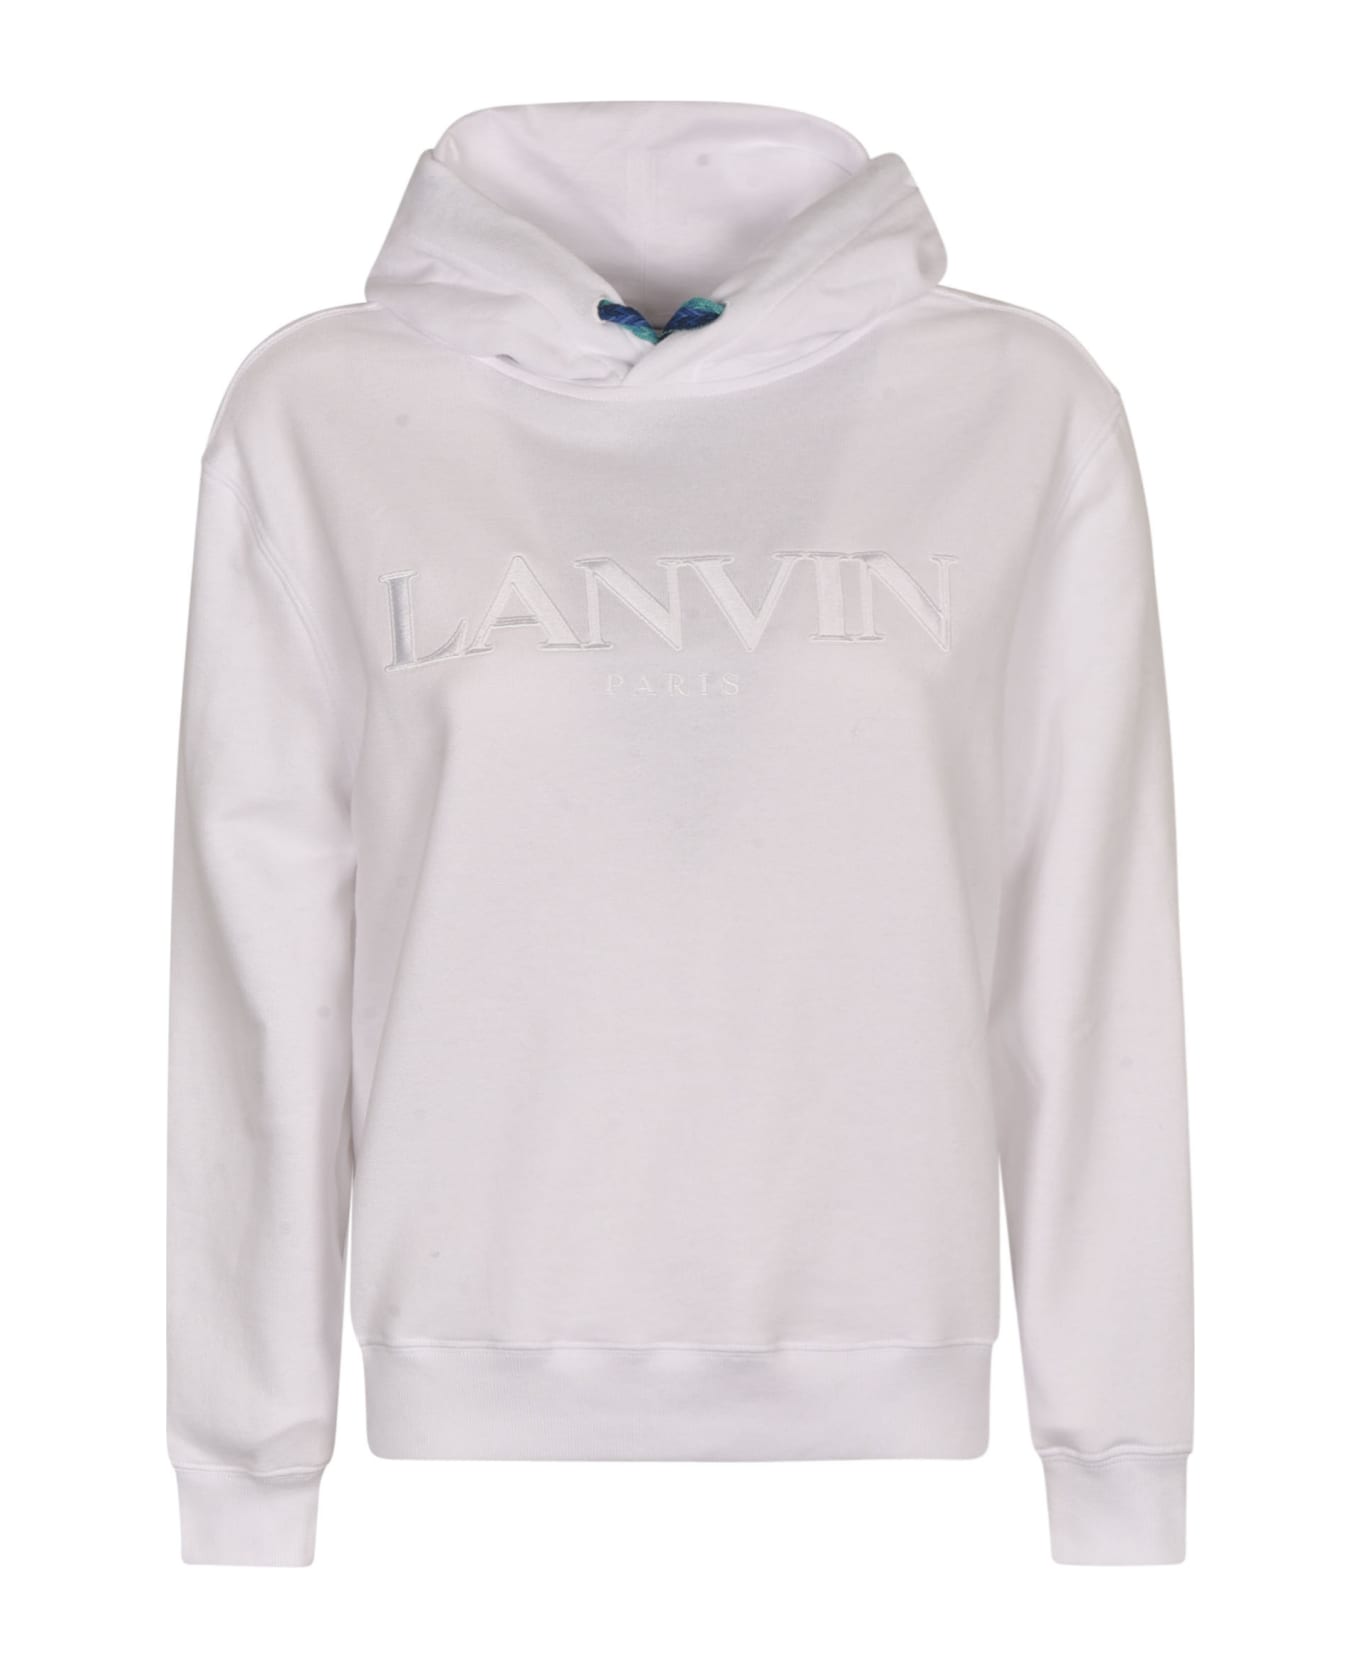 Lanvin Logo Embroidered Hoodie - Optic White